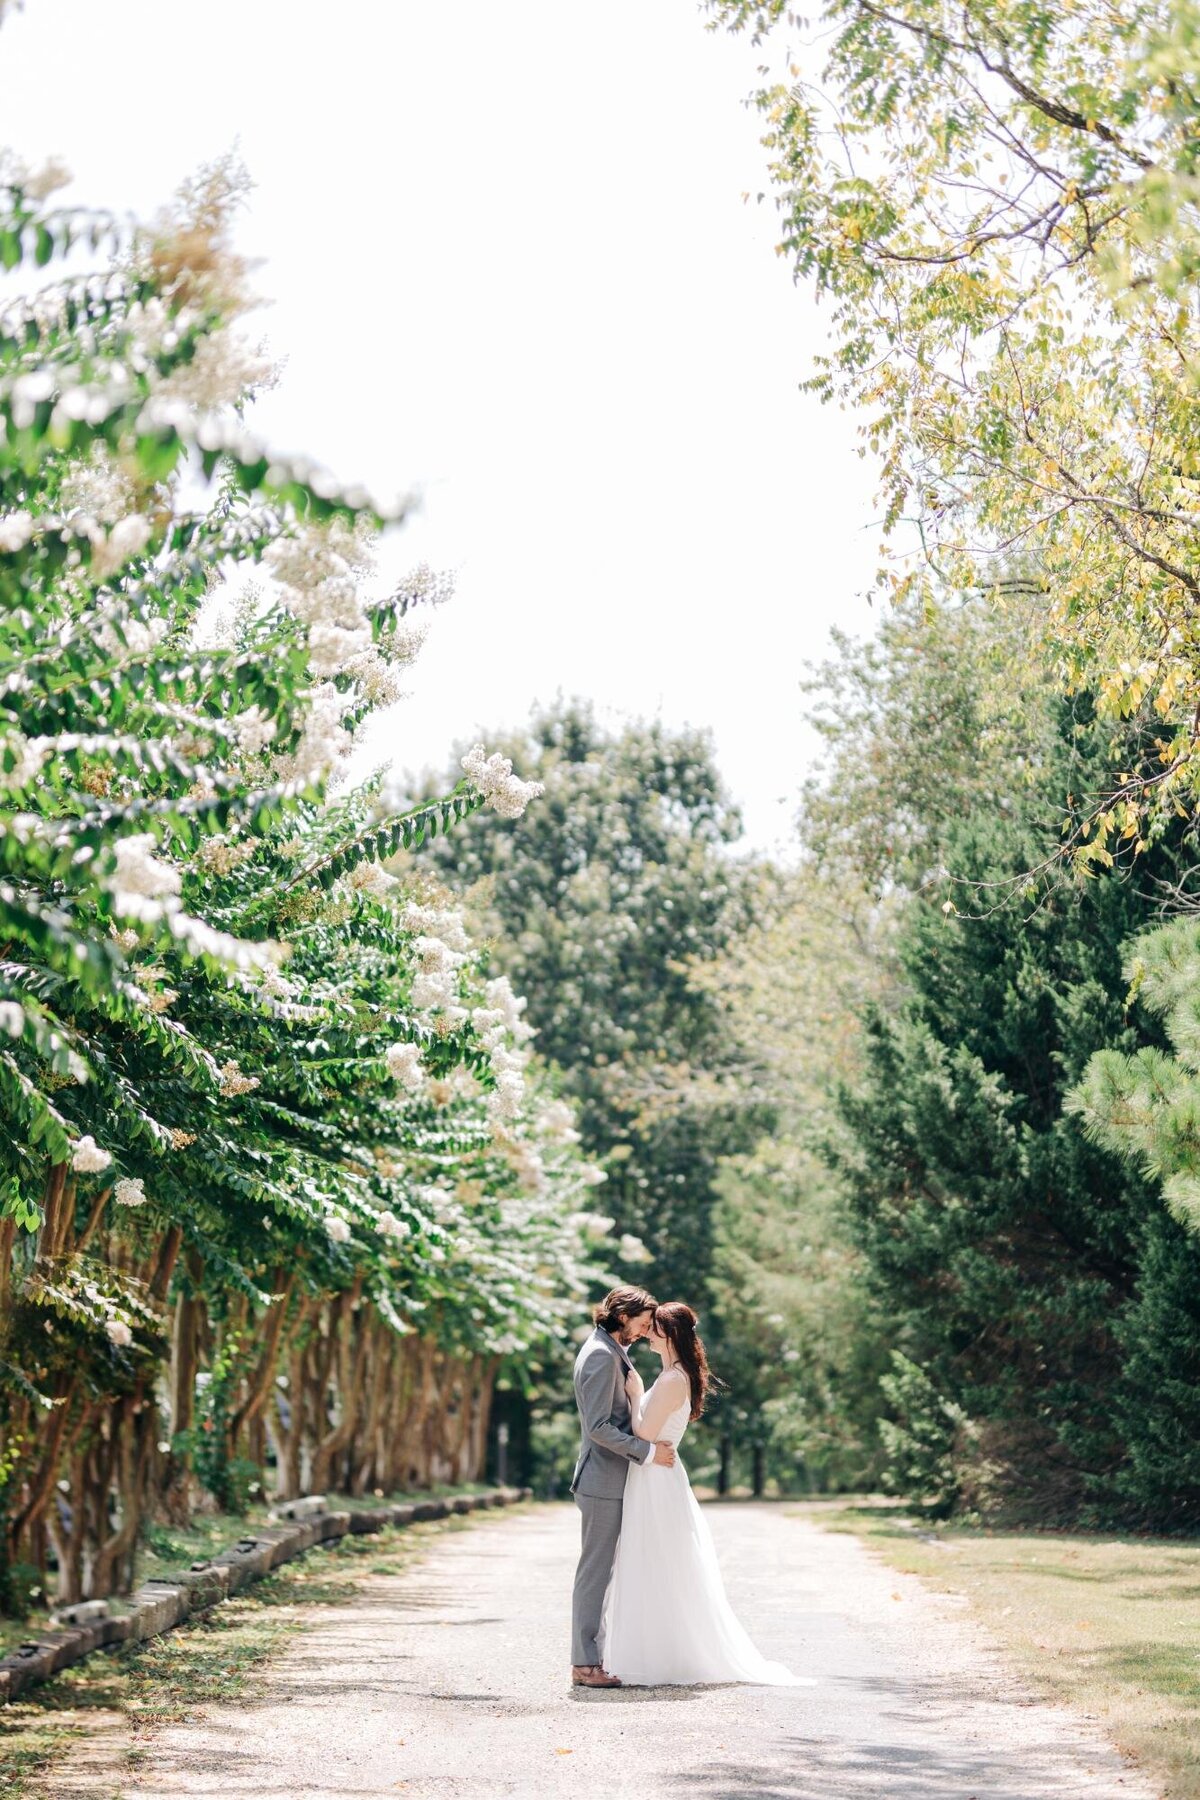 A couple in wedding attire embracing on a tree-lined path.